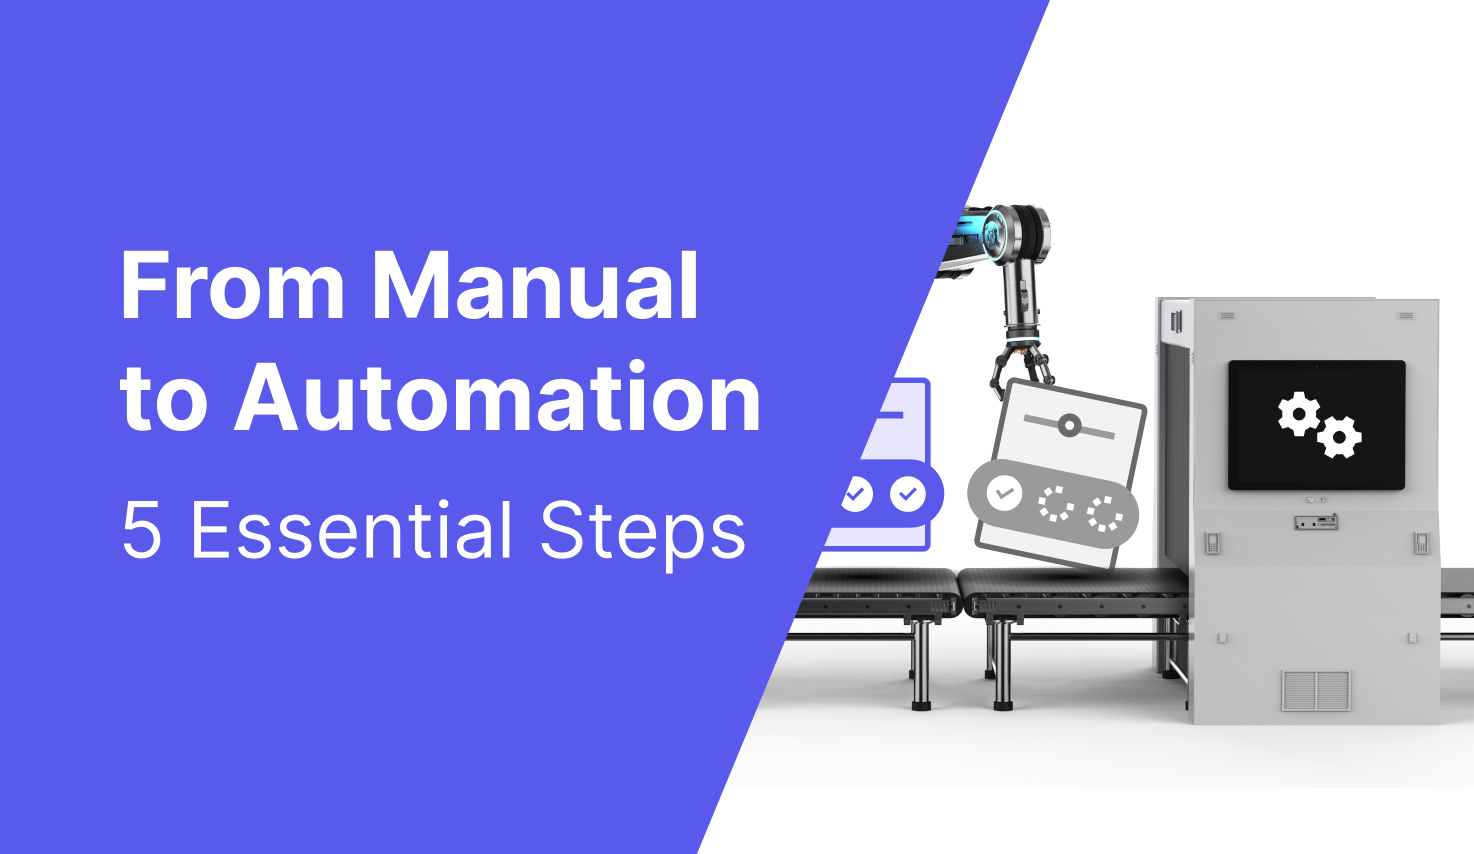  Shifting From Manual to Automation Testing: 5 Essential Steps 